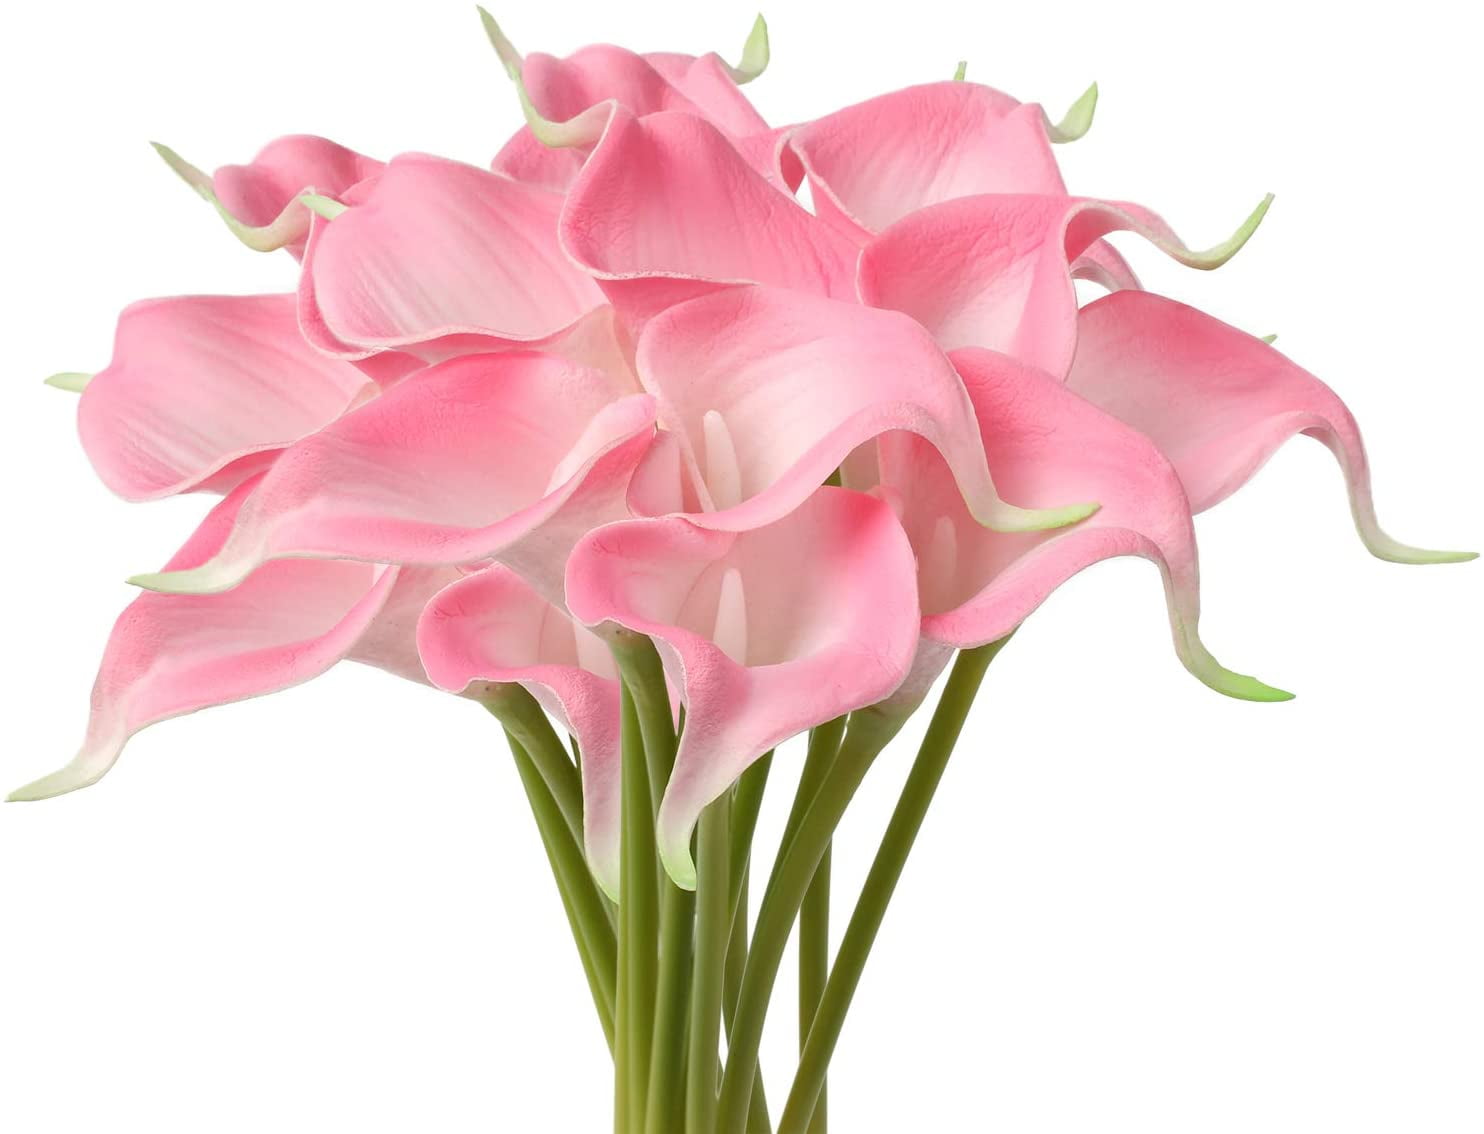 Details about   Calla Lily Fake Flowers Plastic Flowers Plants Common Calla Lily Dried flowersSJ 